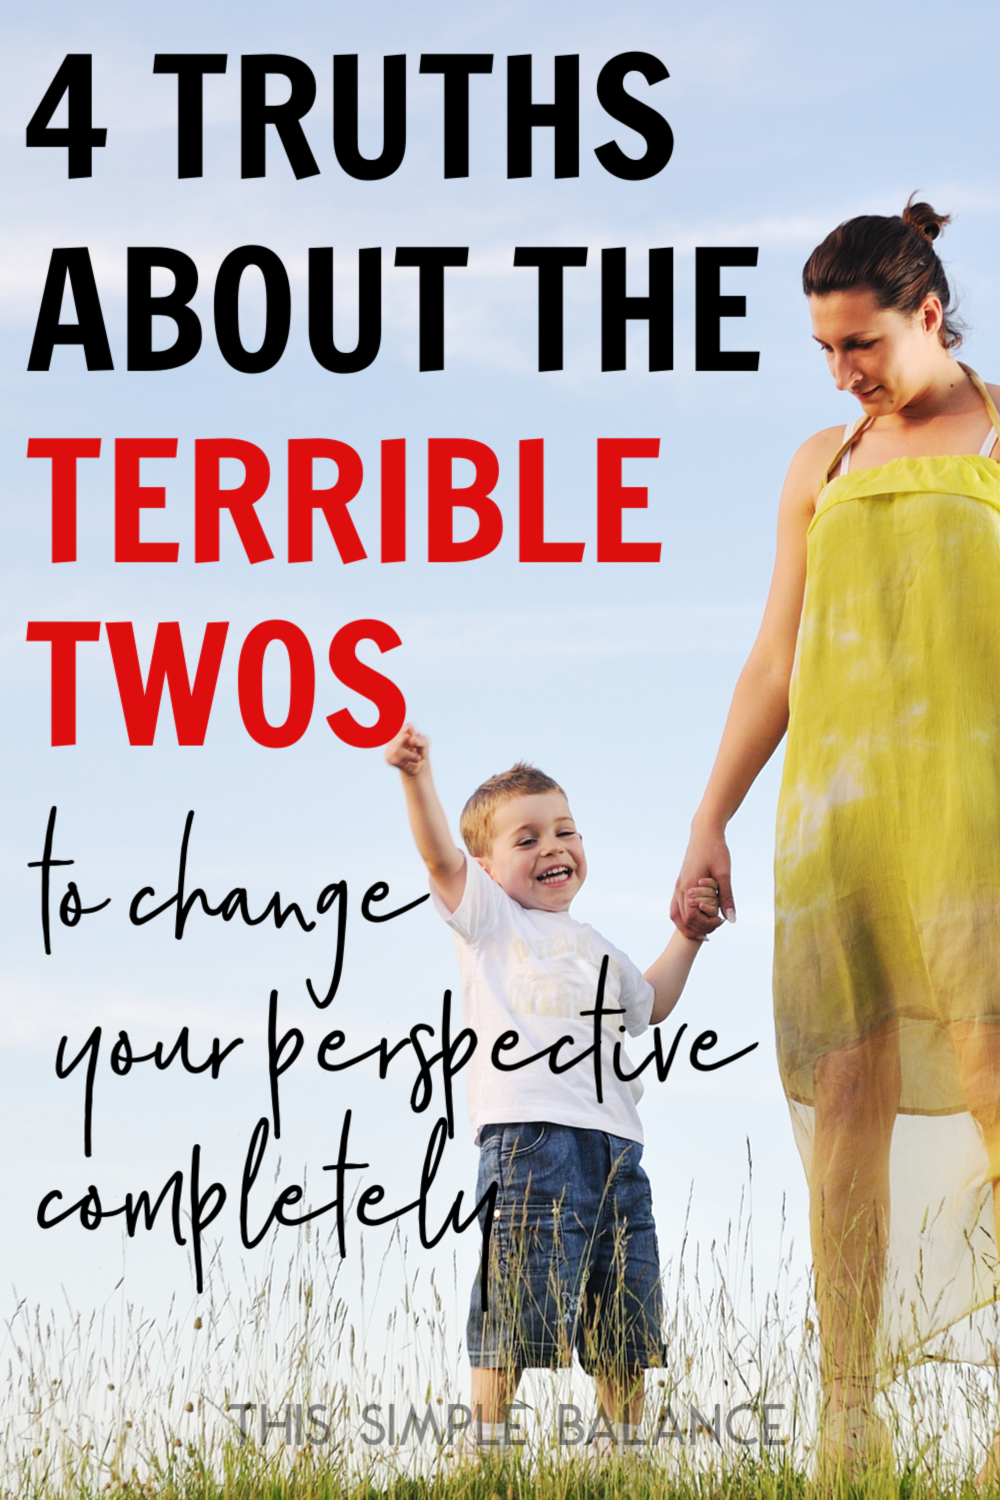 Mom holding hands with smiling older 2-year-old, with text overlay, "4 truths about the terrible twos to change your perspective completely"